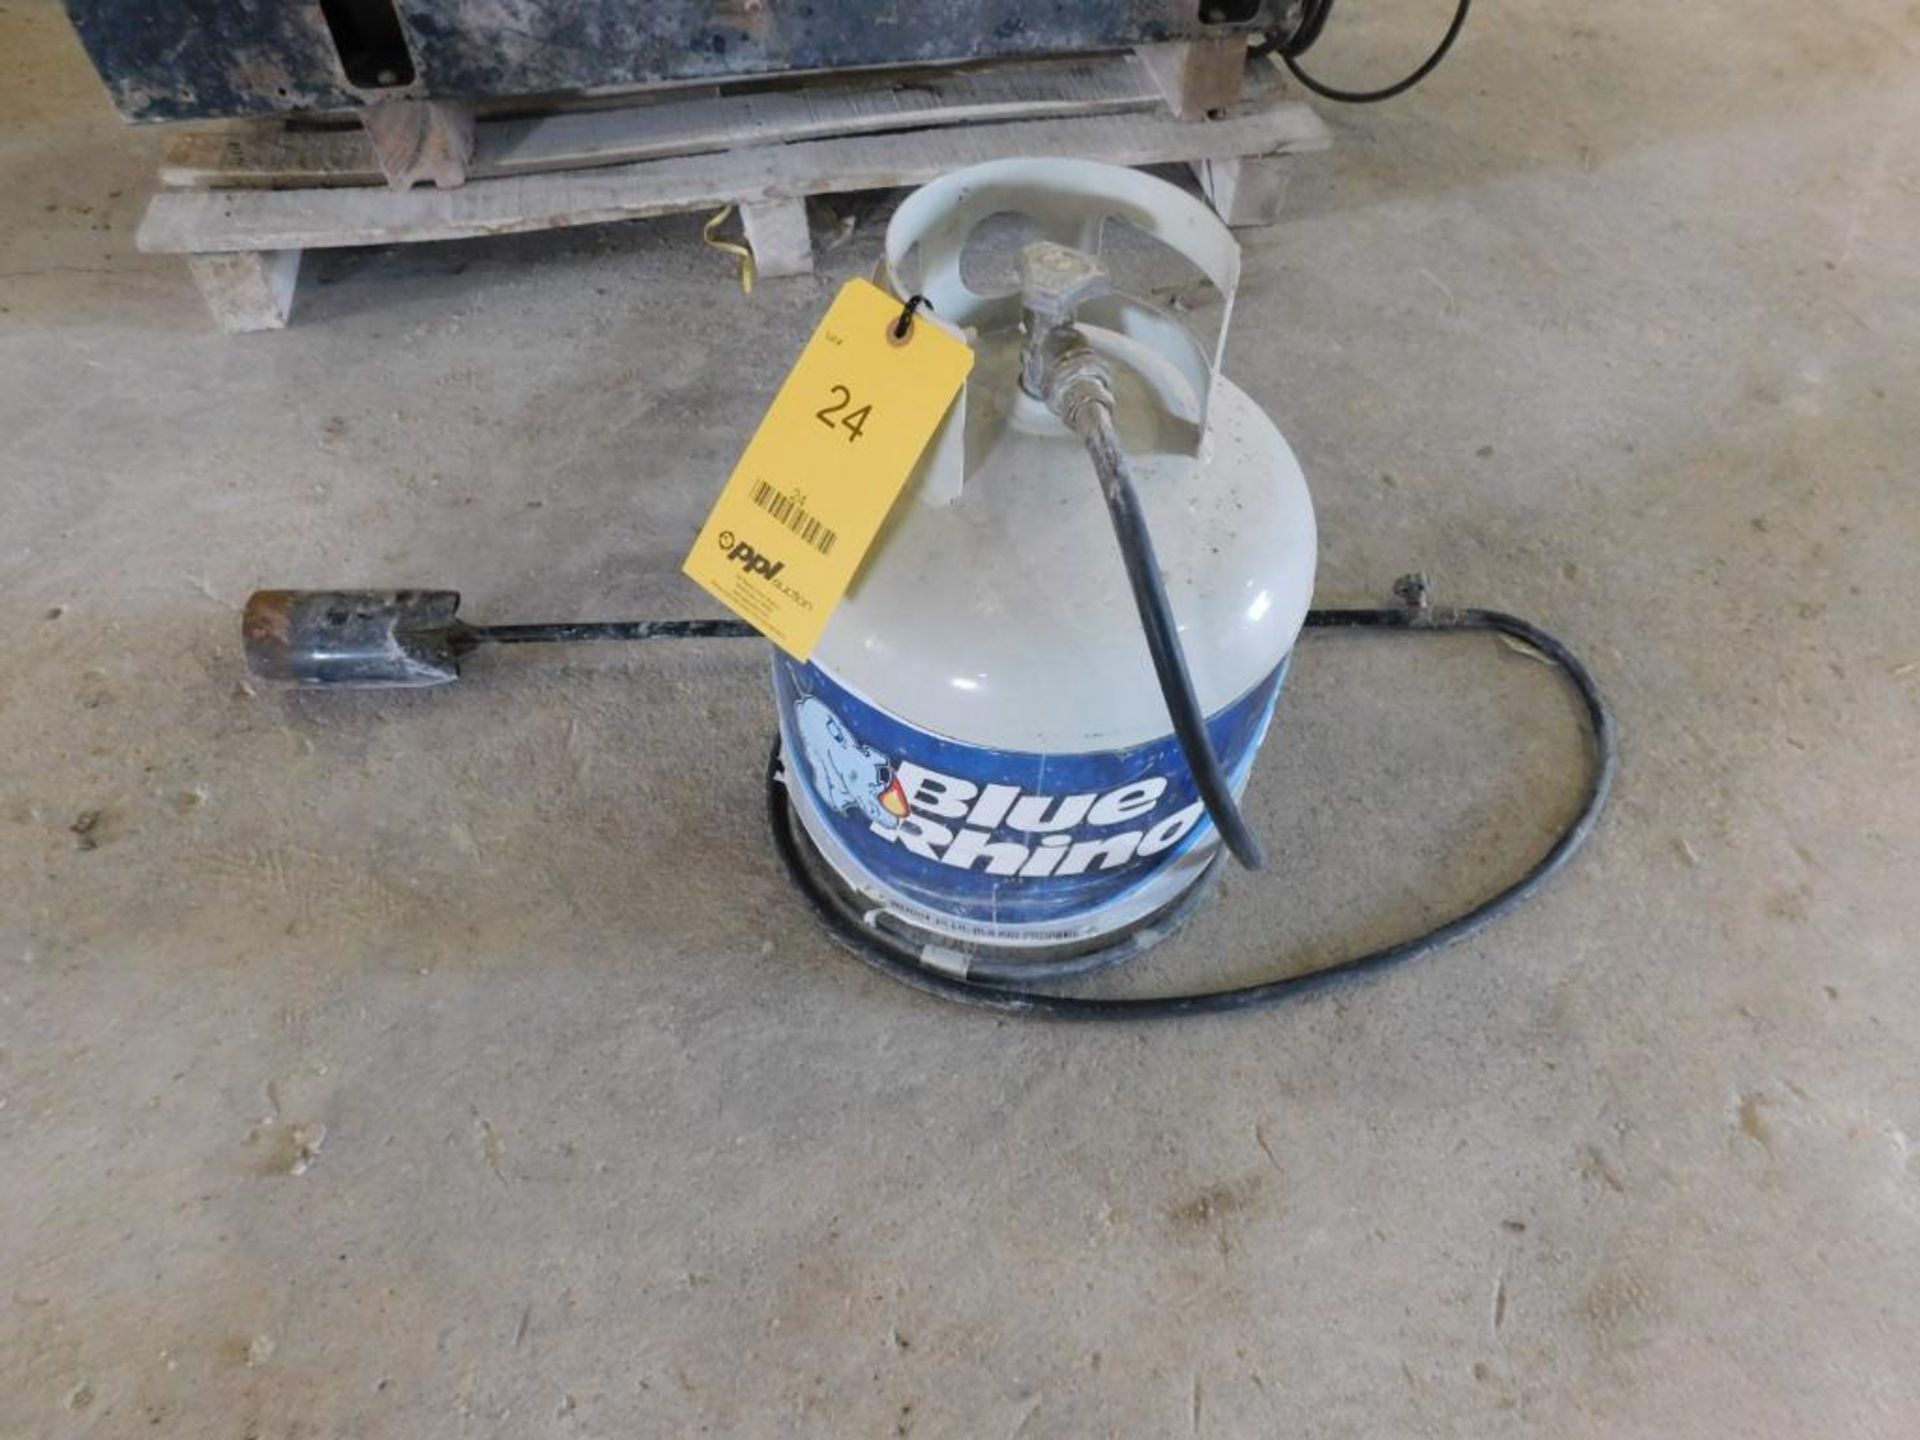 Propane Tank, with Torch